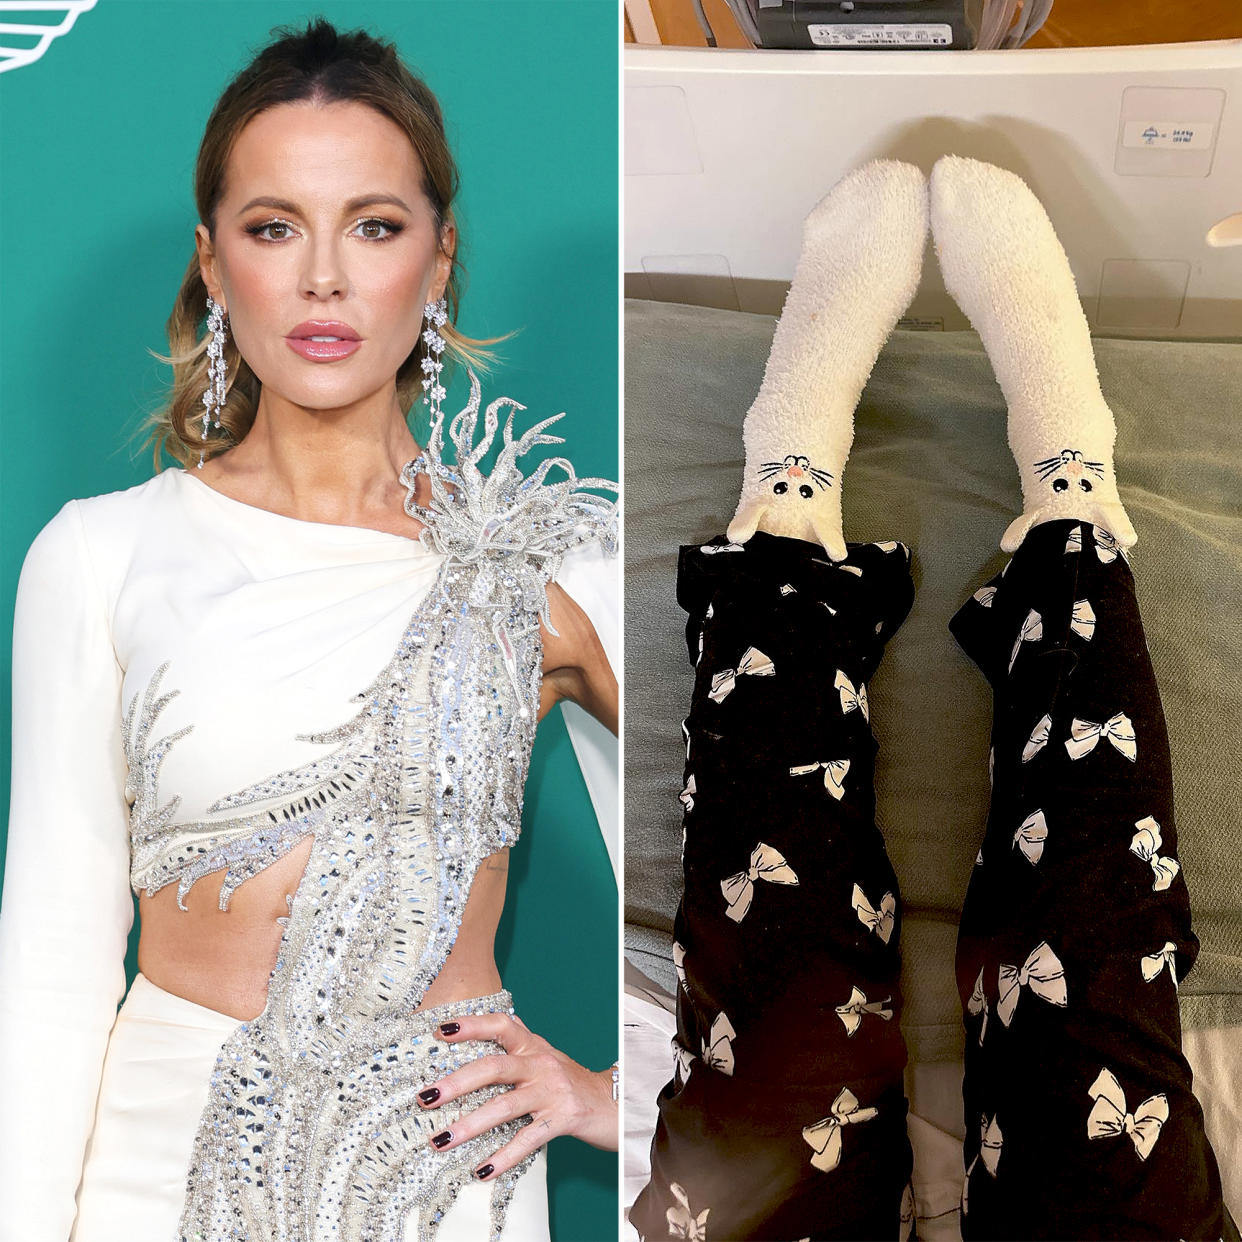 Kate Beckinsale Shows Off Easter-Themed Socks From Hospital Bed